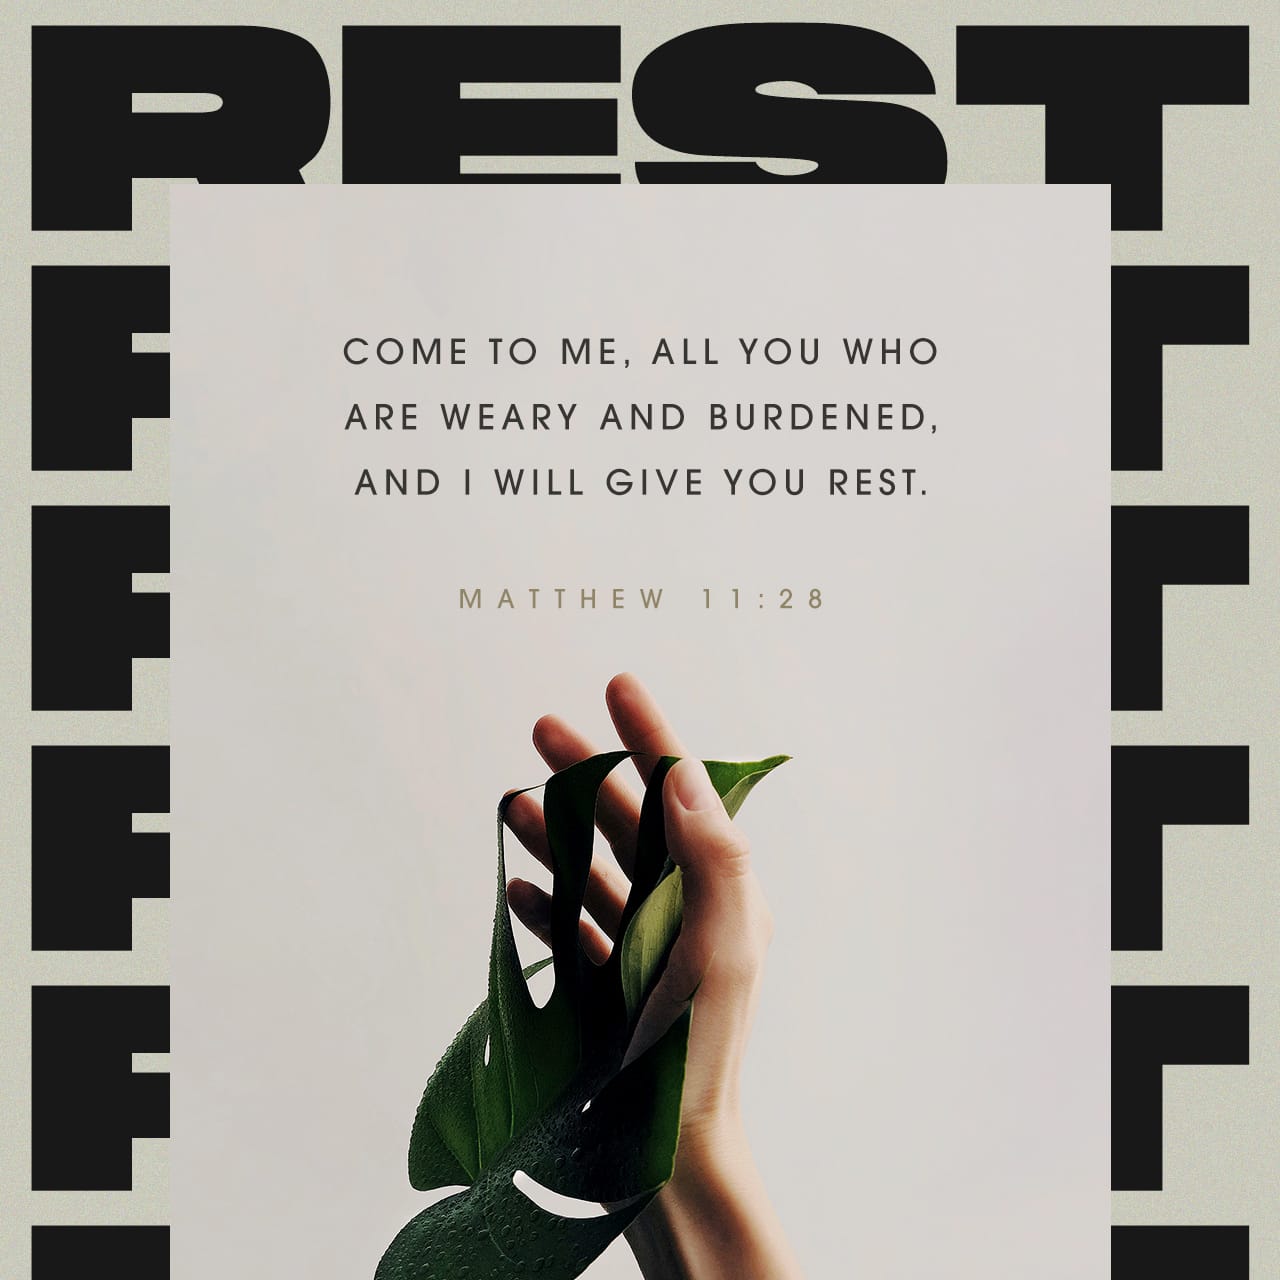 Matthew 11:28 “Are you weary, carrying a heavy burden? Come to me. I will  refresh your life, for I am your oasis. | The Passion Translation (TPT) |  Download The Bible App Now